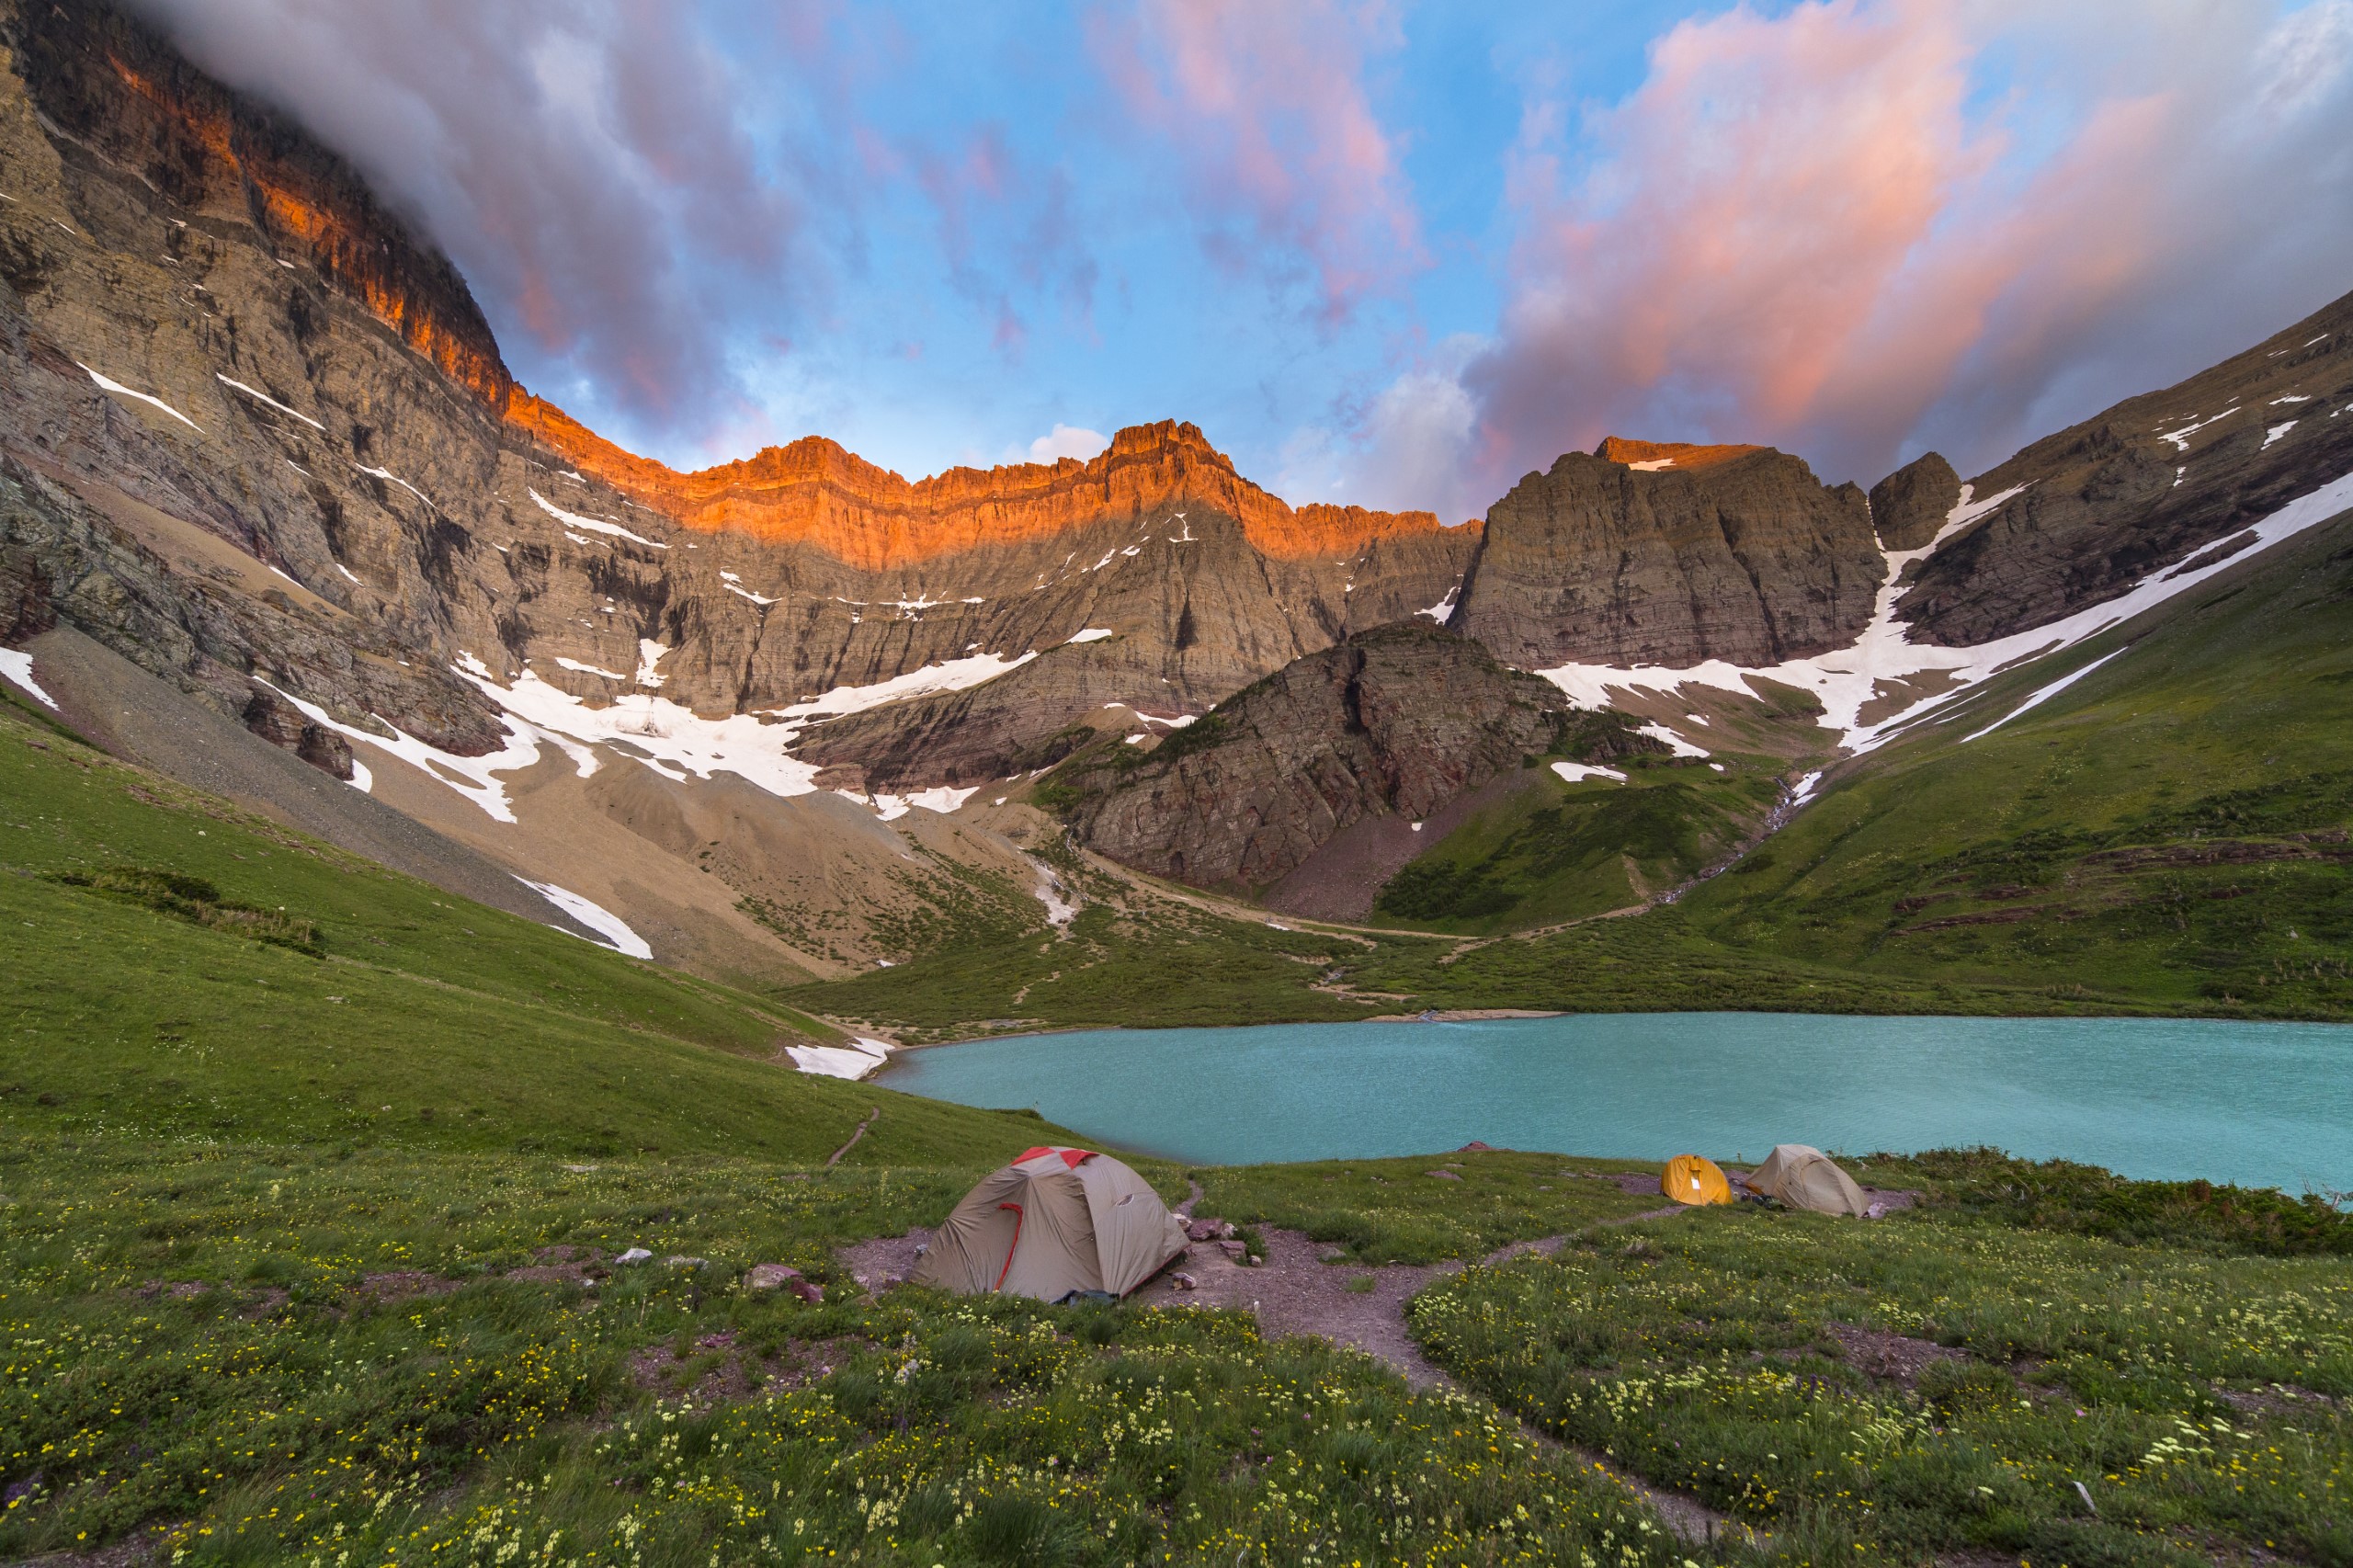 tents camped near a blue lake surrounded by mountains